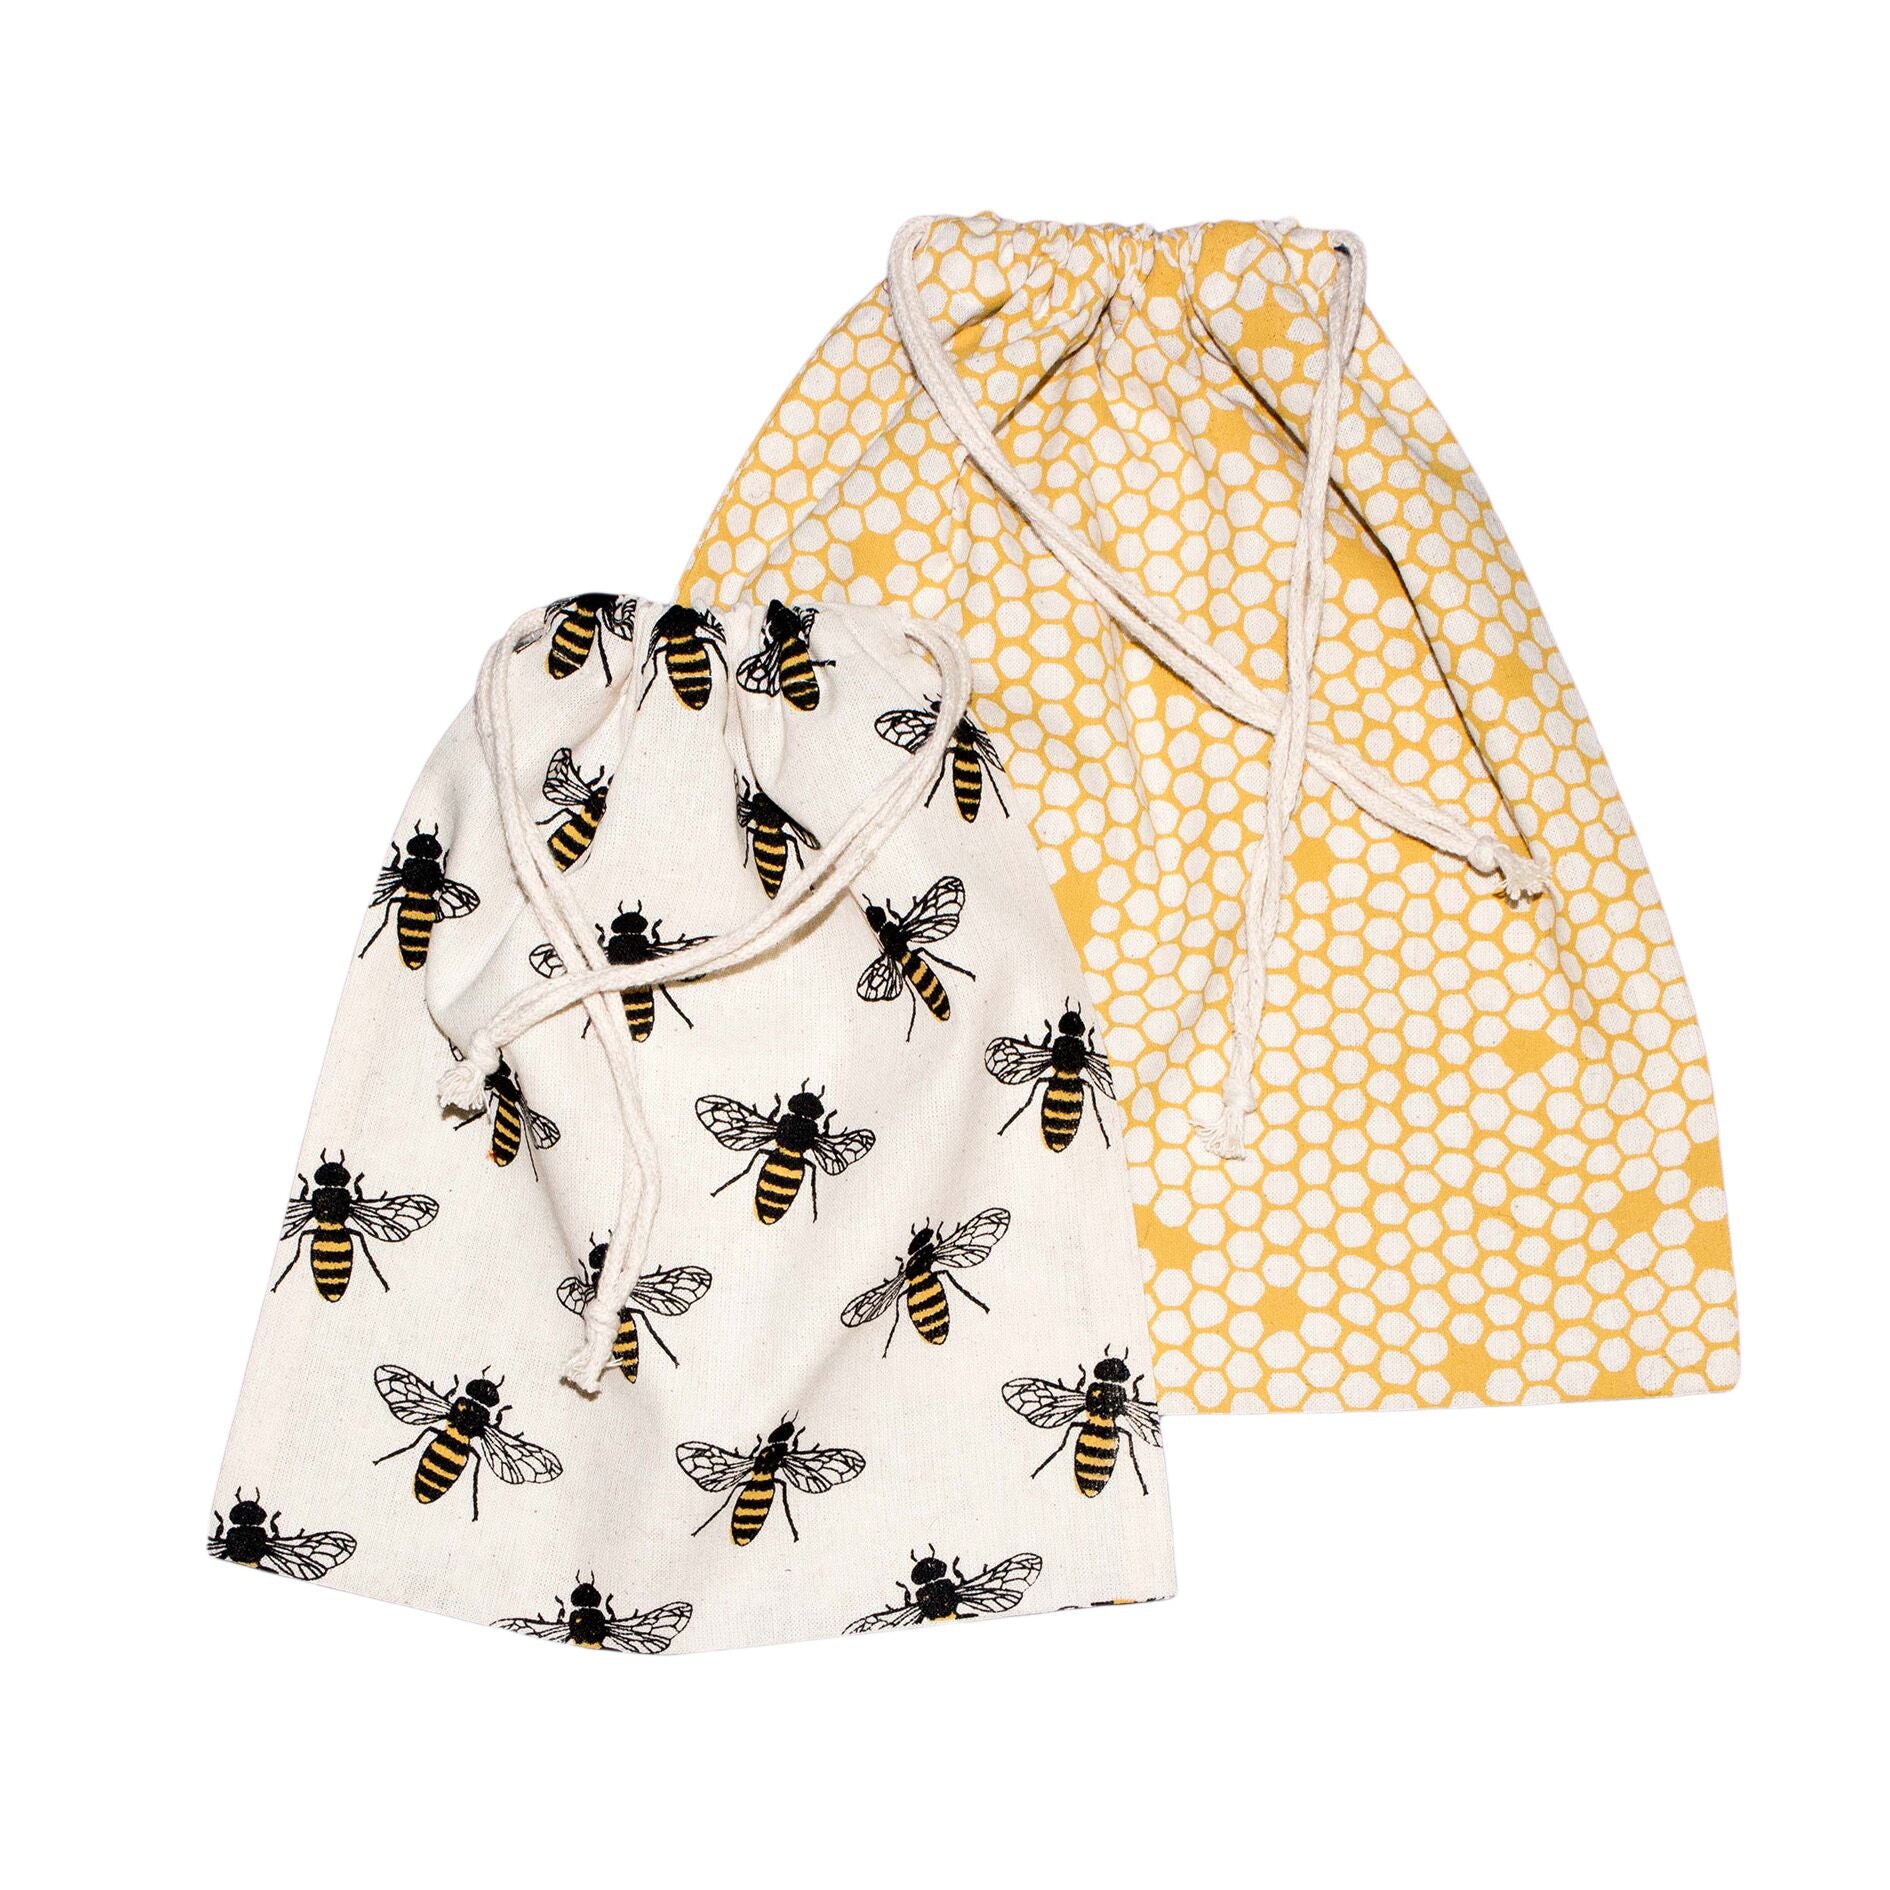 Cotton Produce Bags (Bees)